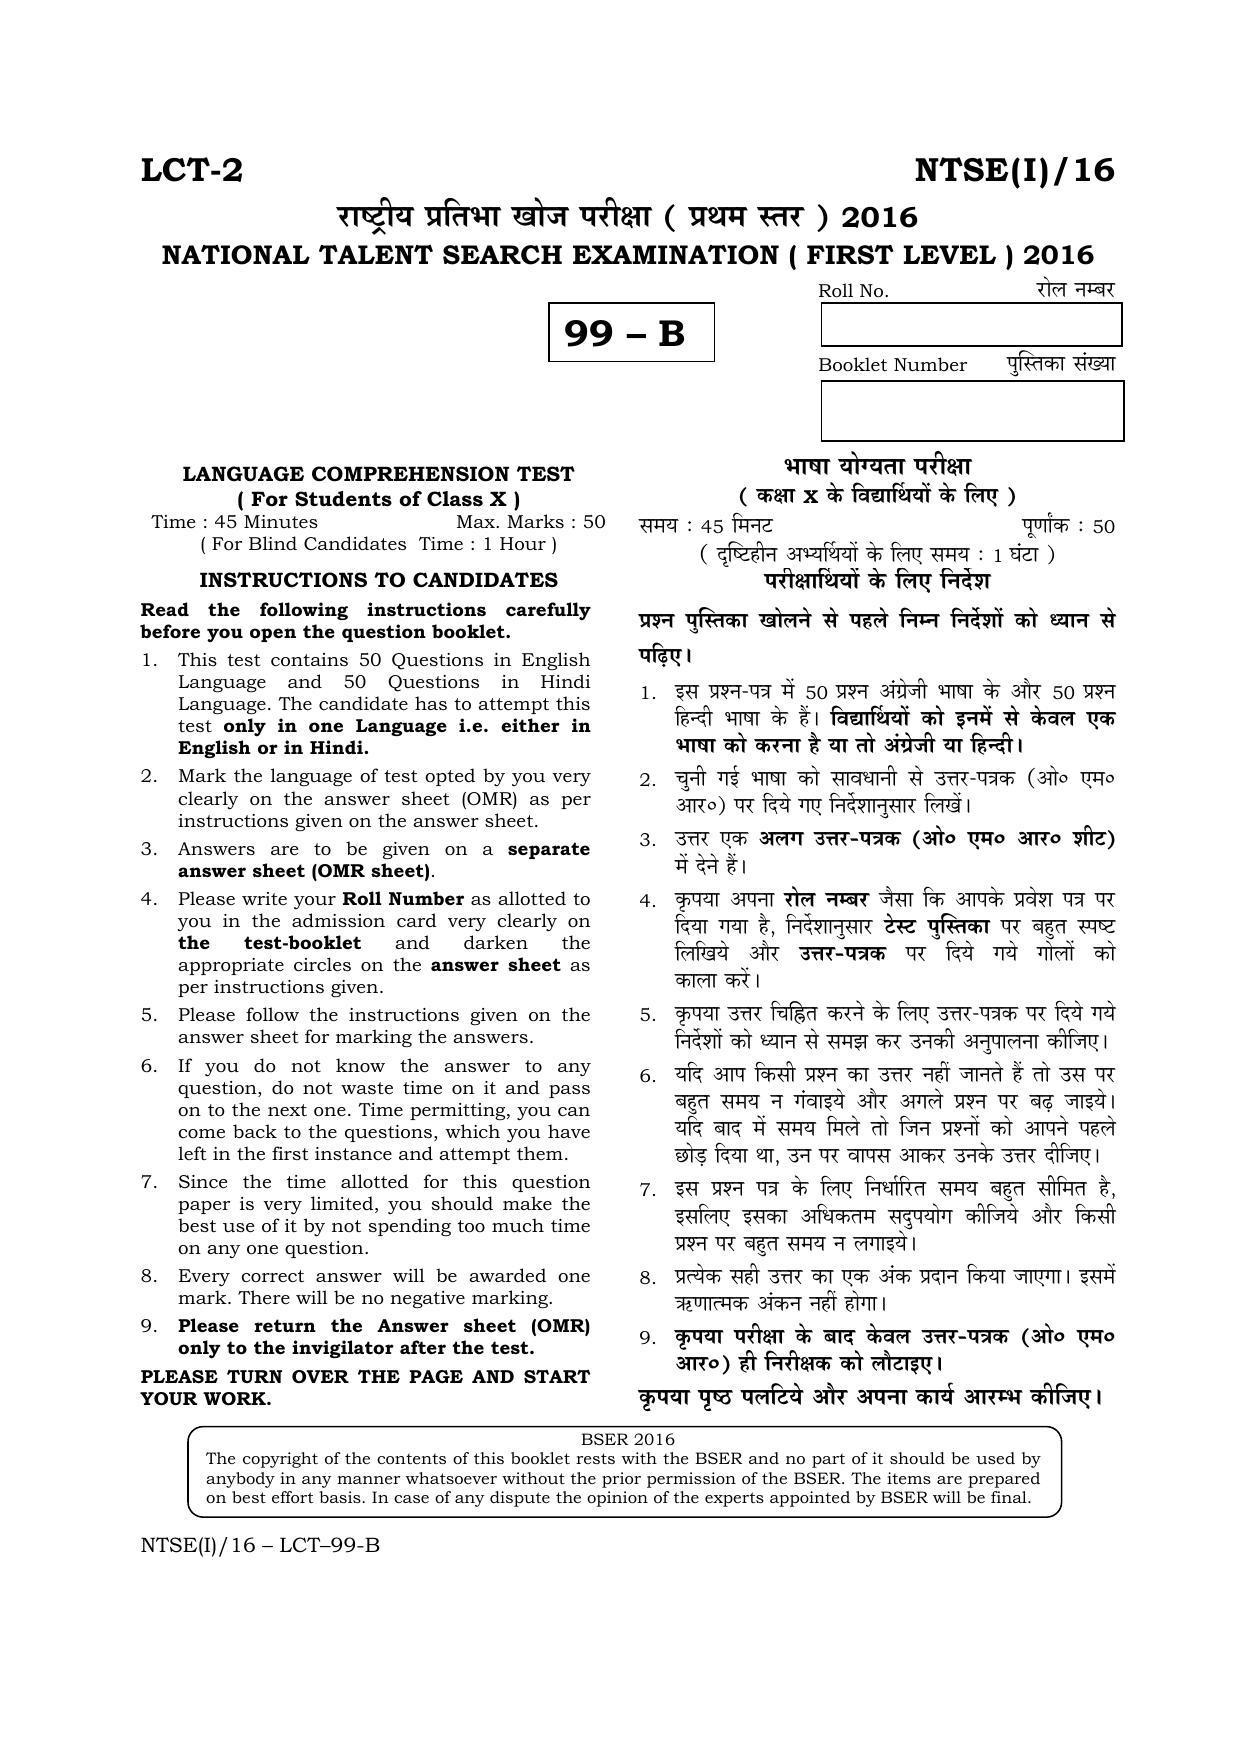 NTSE 2016 (Stage II) LCT Question Paper - Page 1